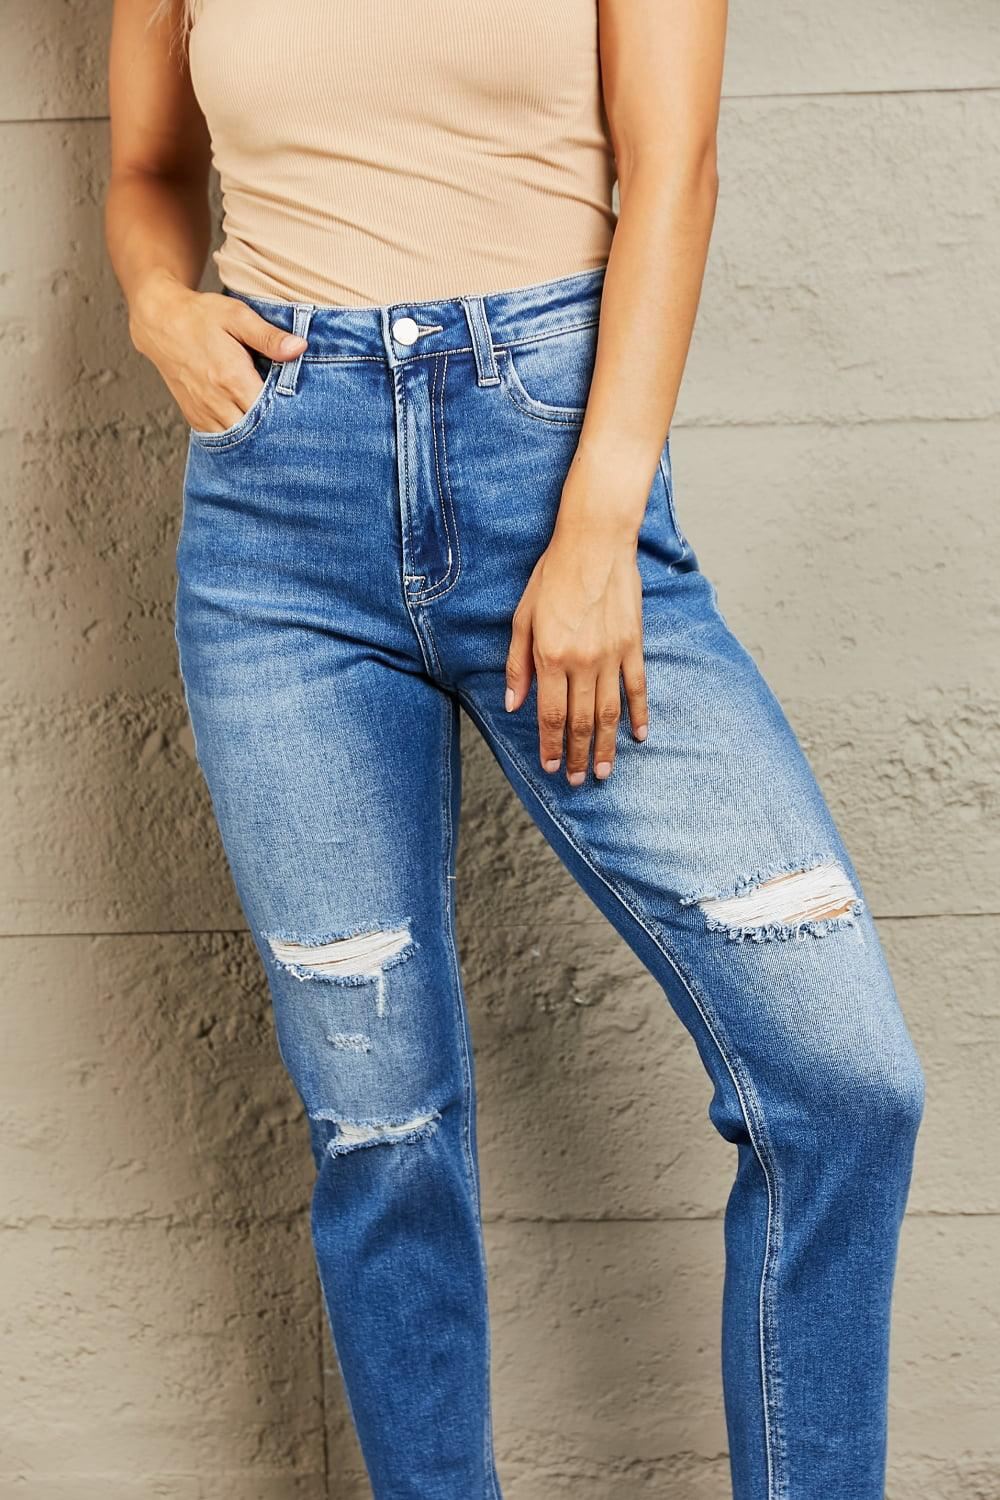 Distressed Dad Jeans - Medium Wash - Inspired Eye Boutique